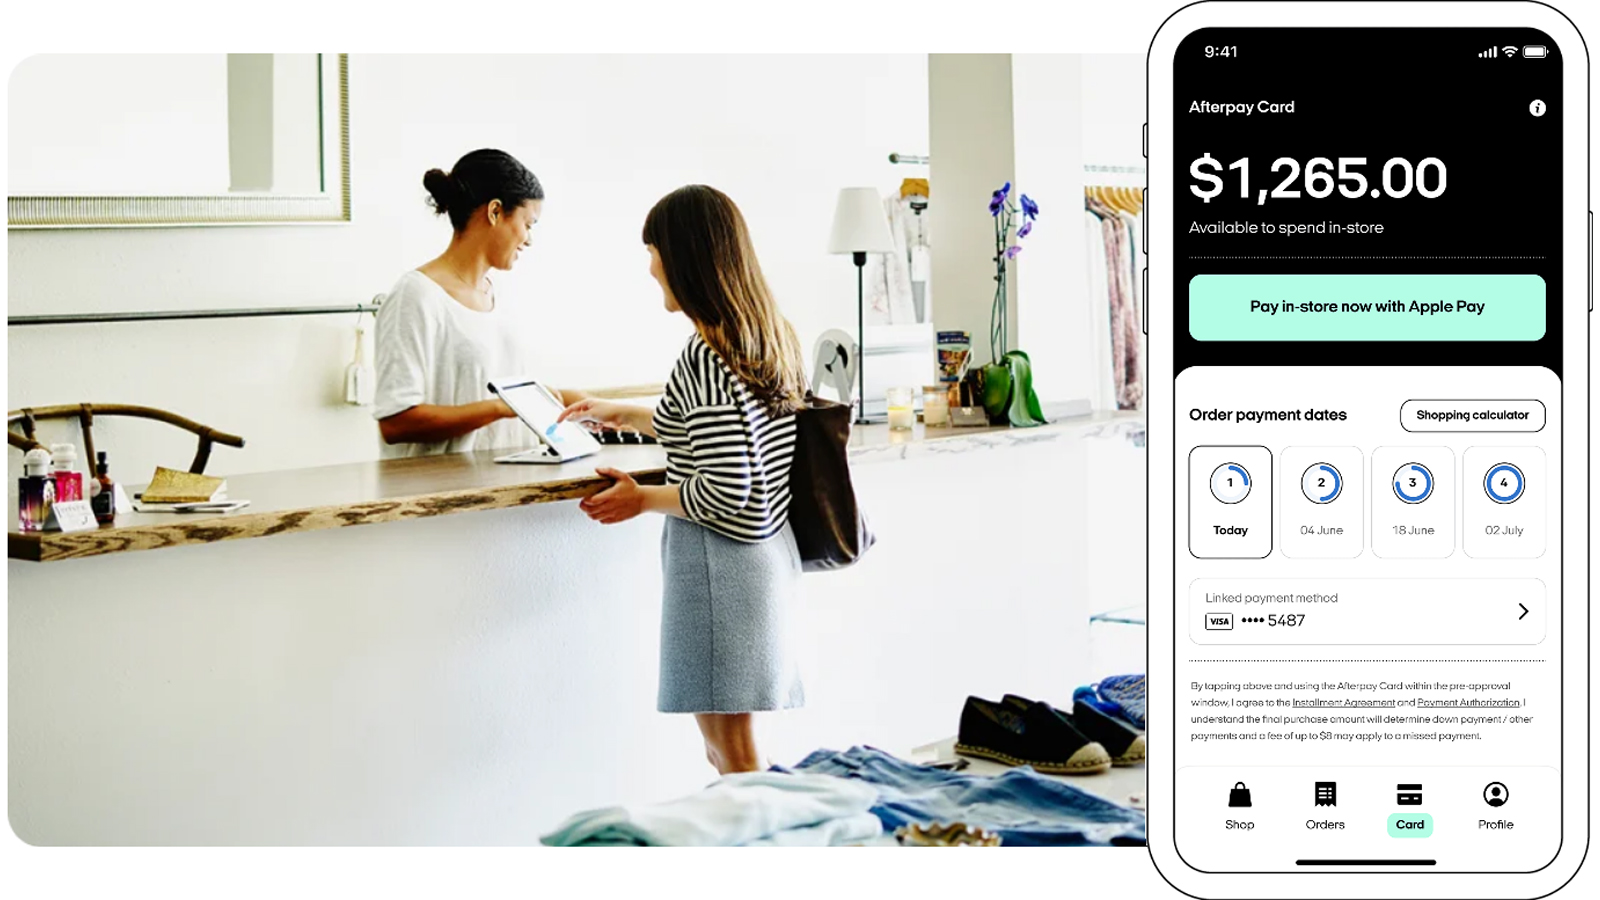 Find pricing, reviews and other details about Afterpay